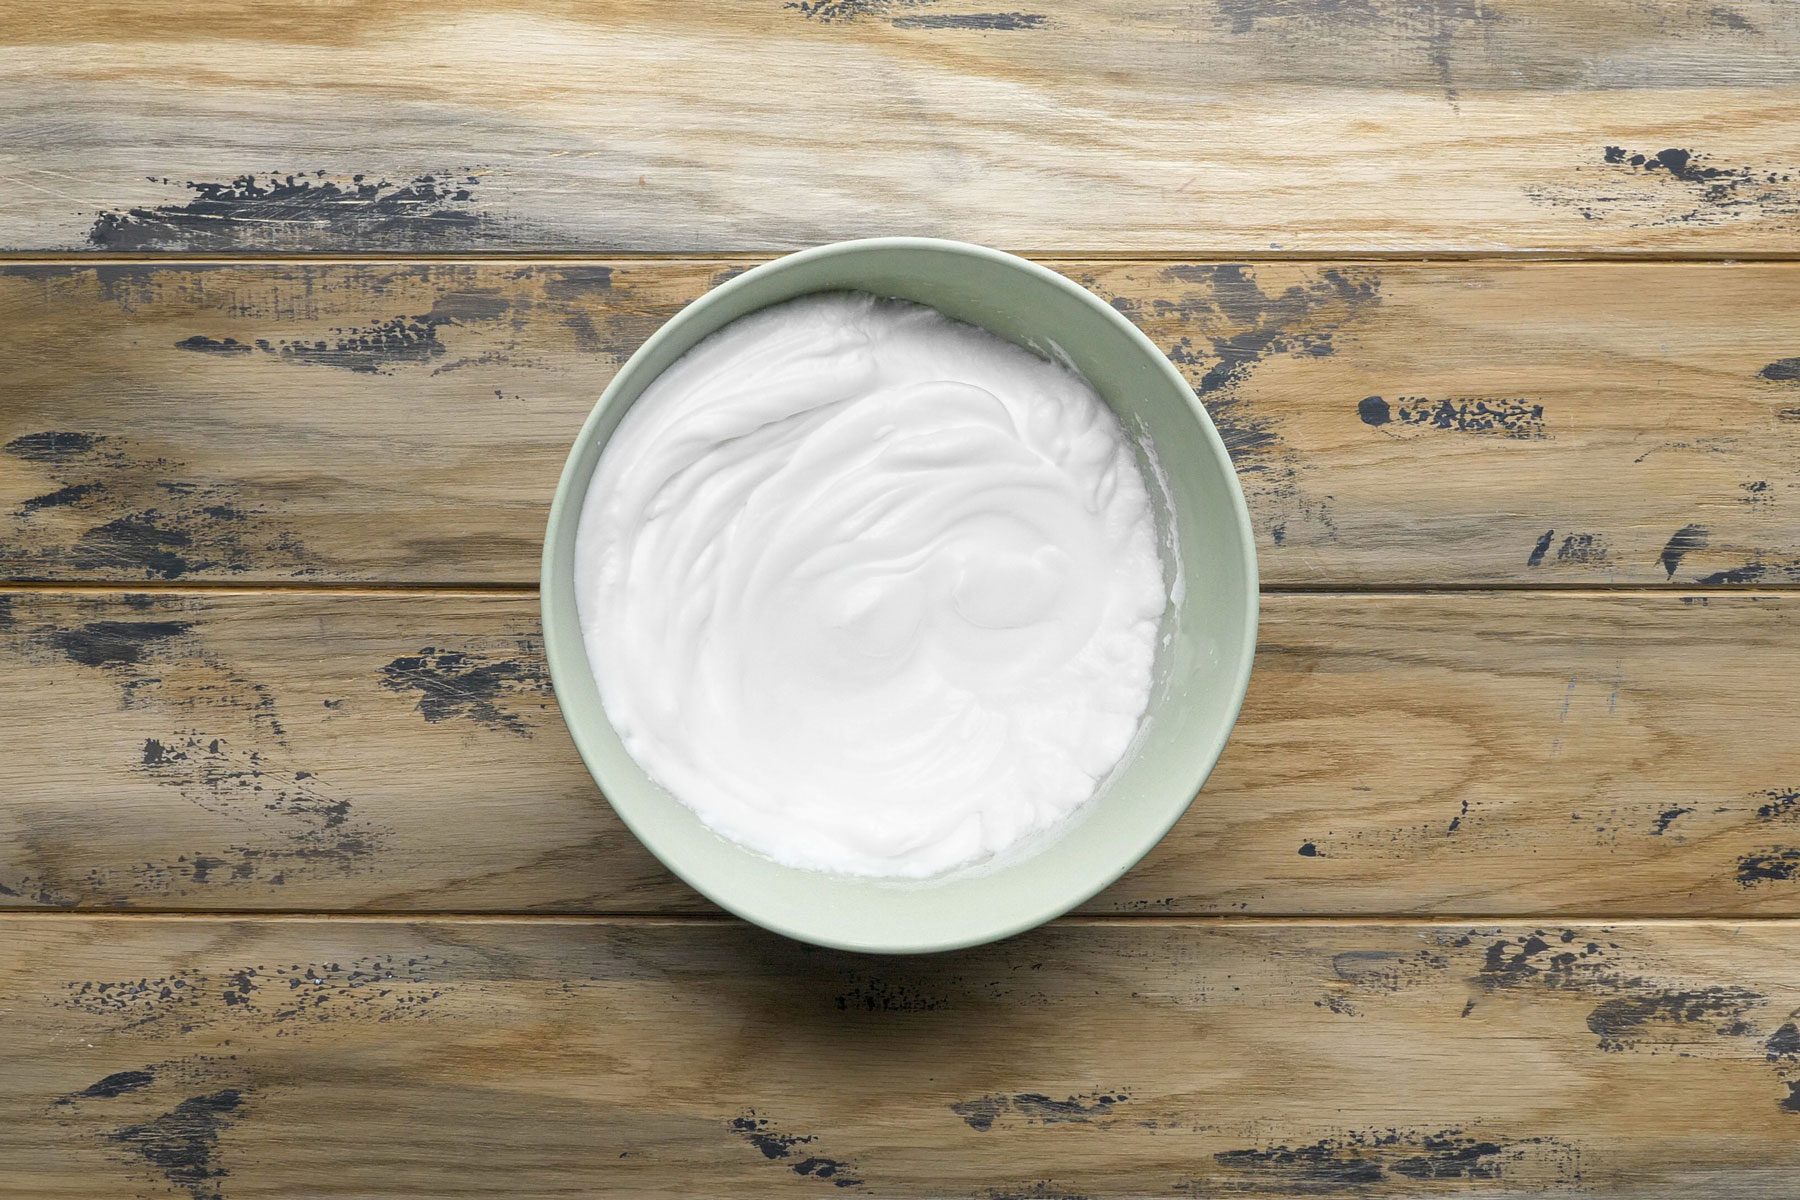 Egg whites stiff peak in a small bowl on a wooden table